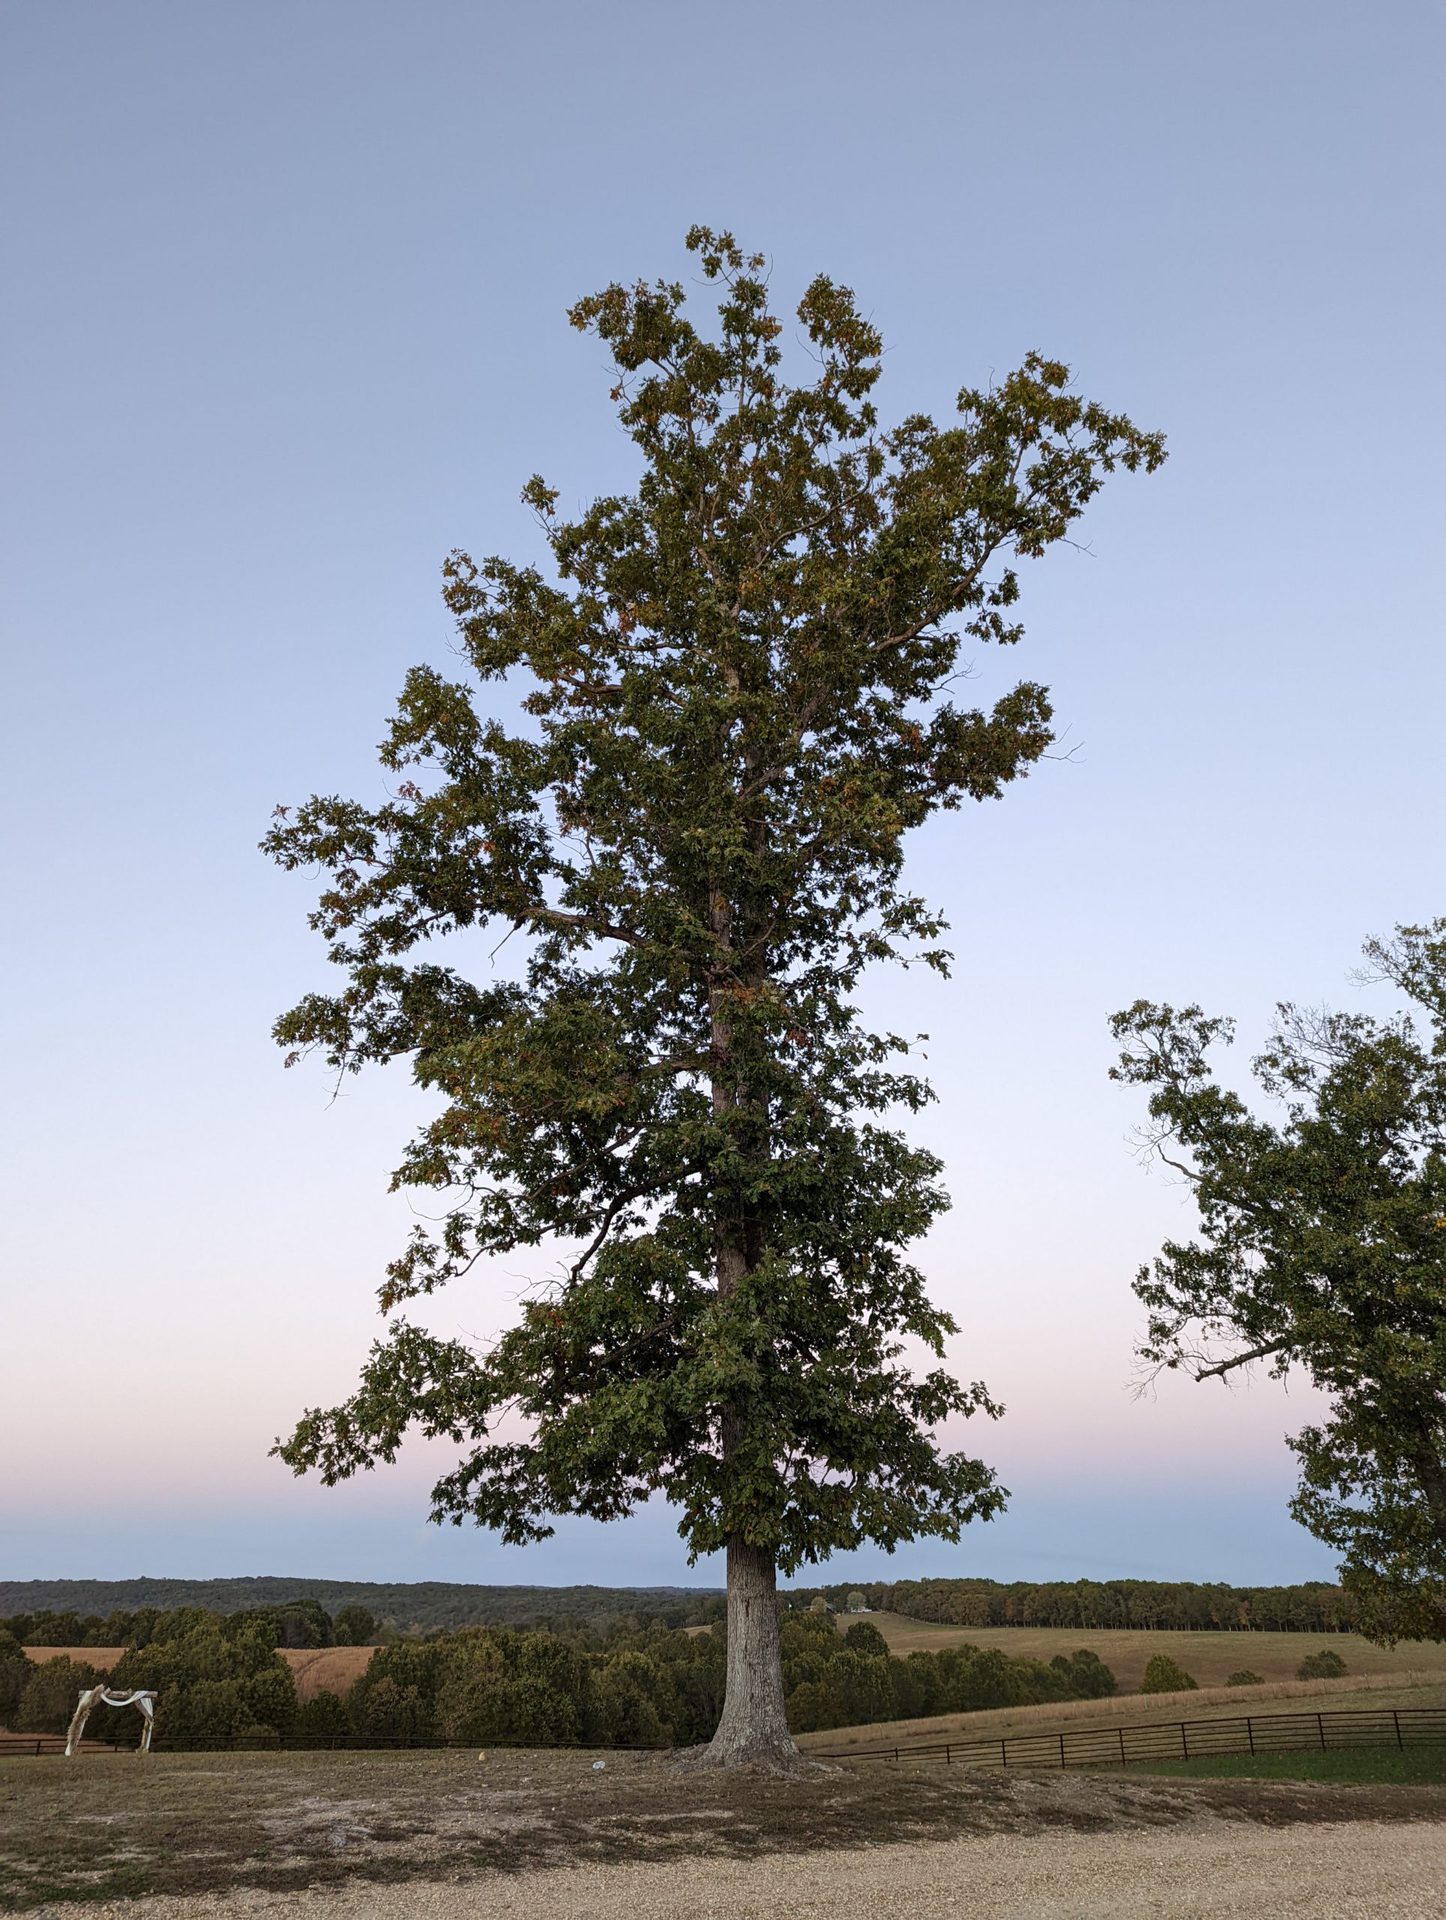 An image of a tree taken with the Google Pixel 6 camera